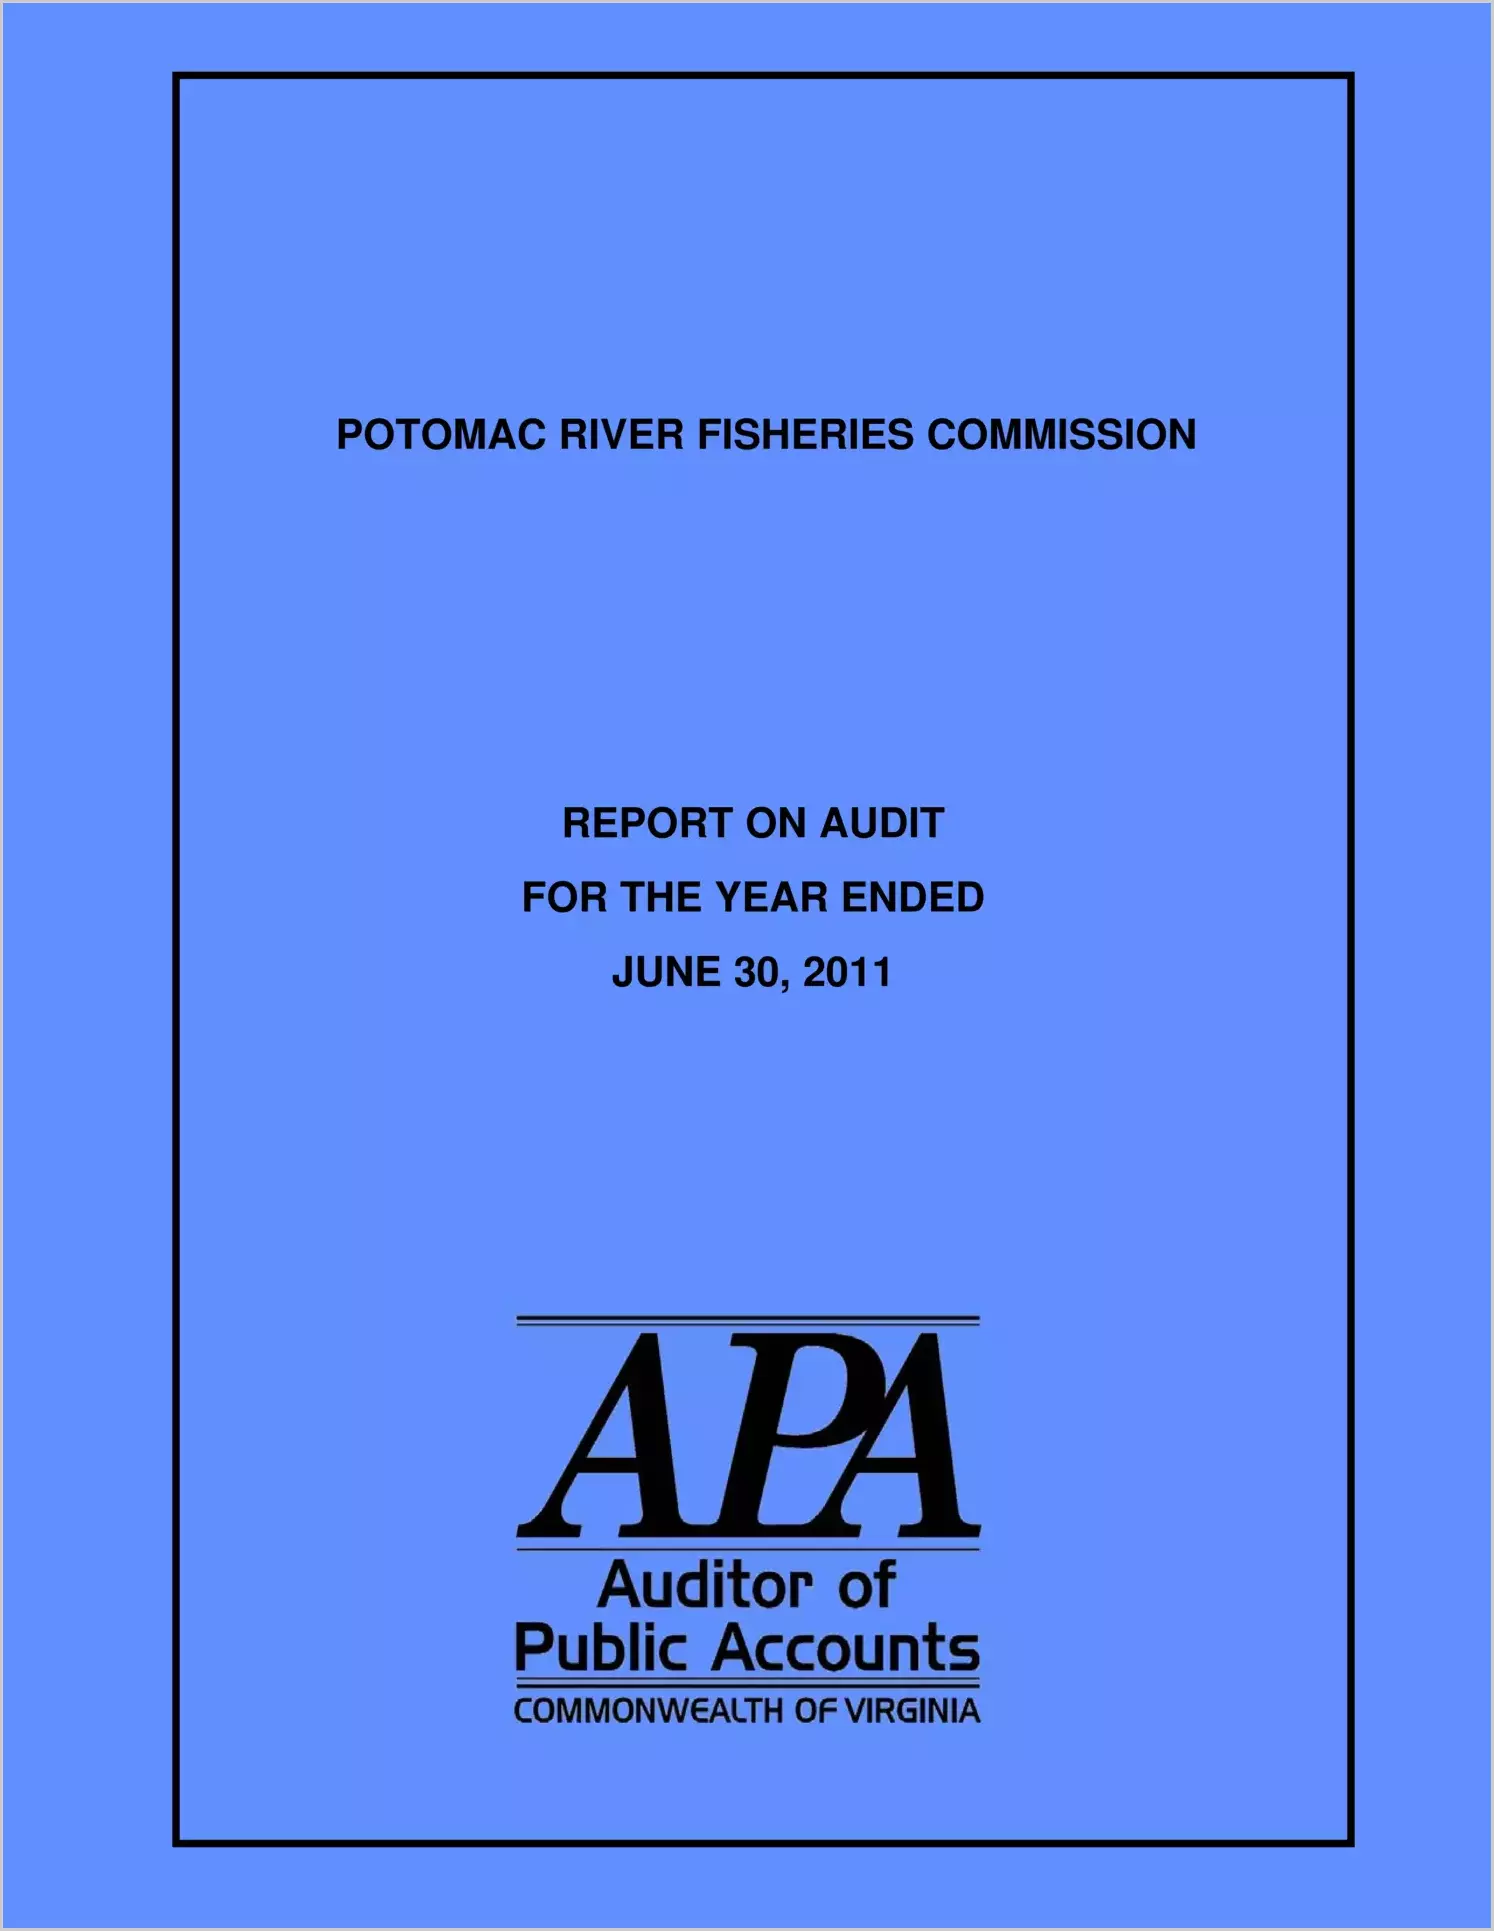 Potomac River Fisheries Commission report on audit for the year ended June 30, 2011